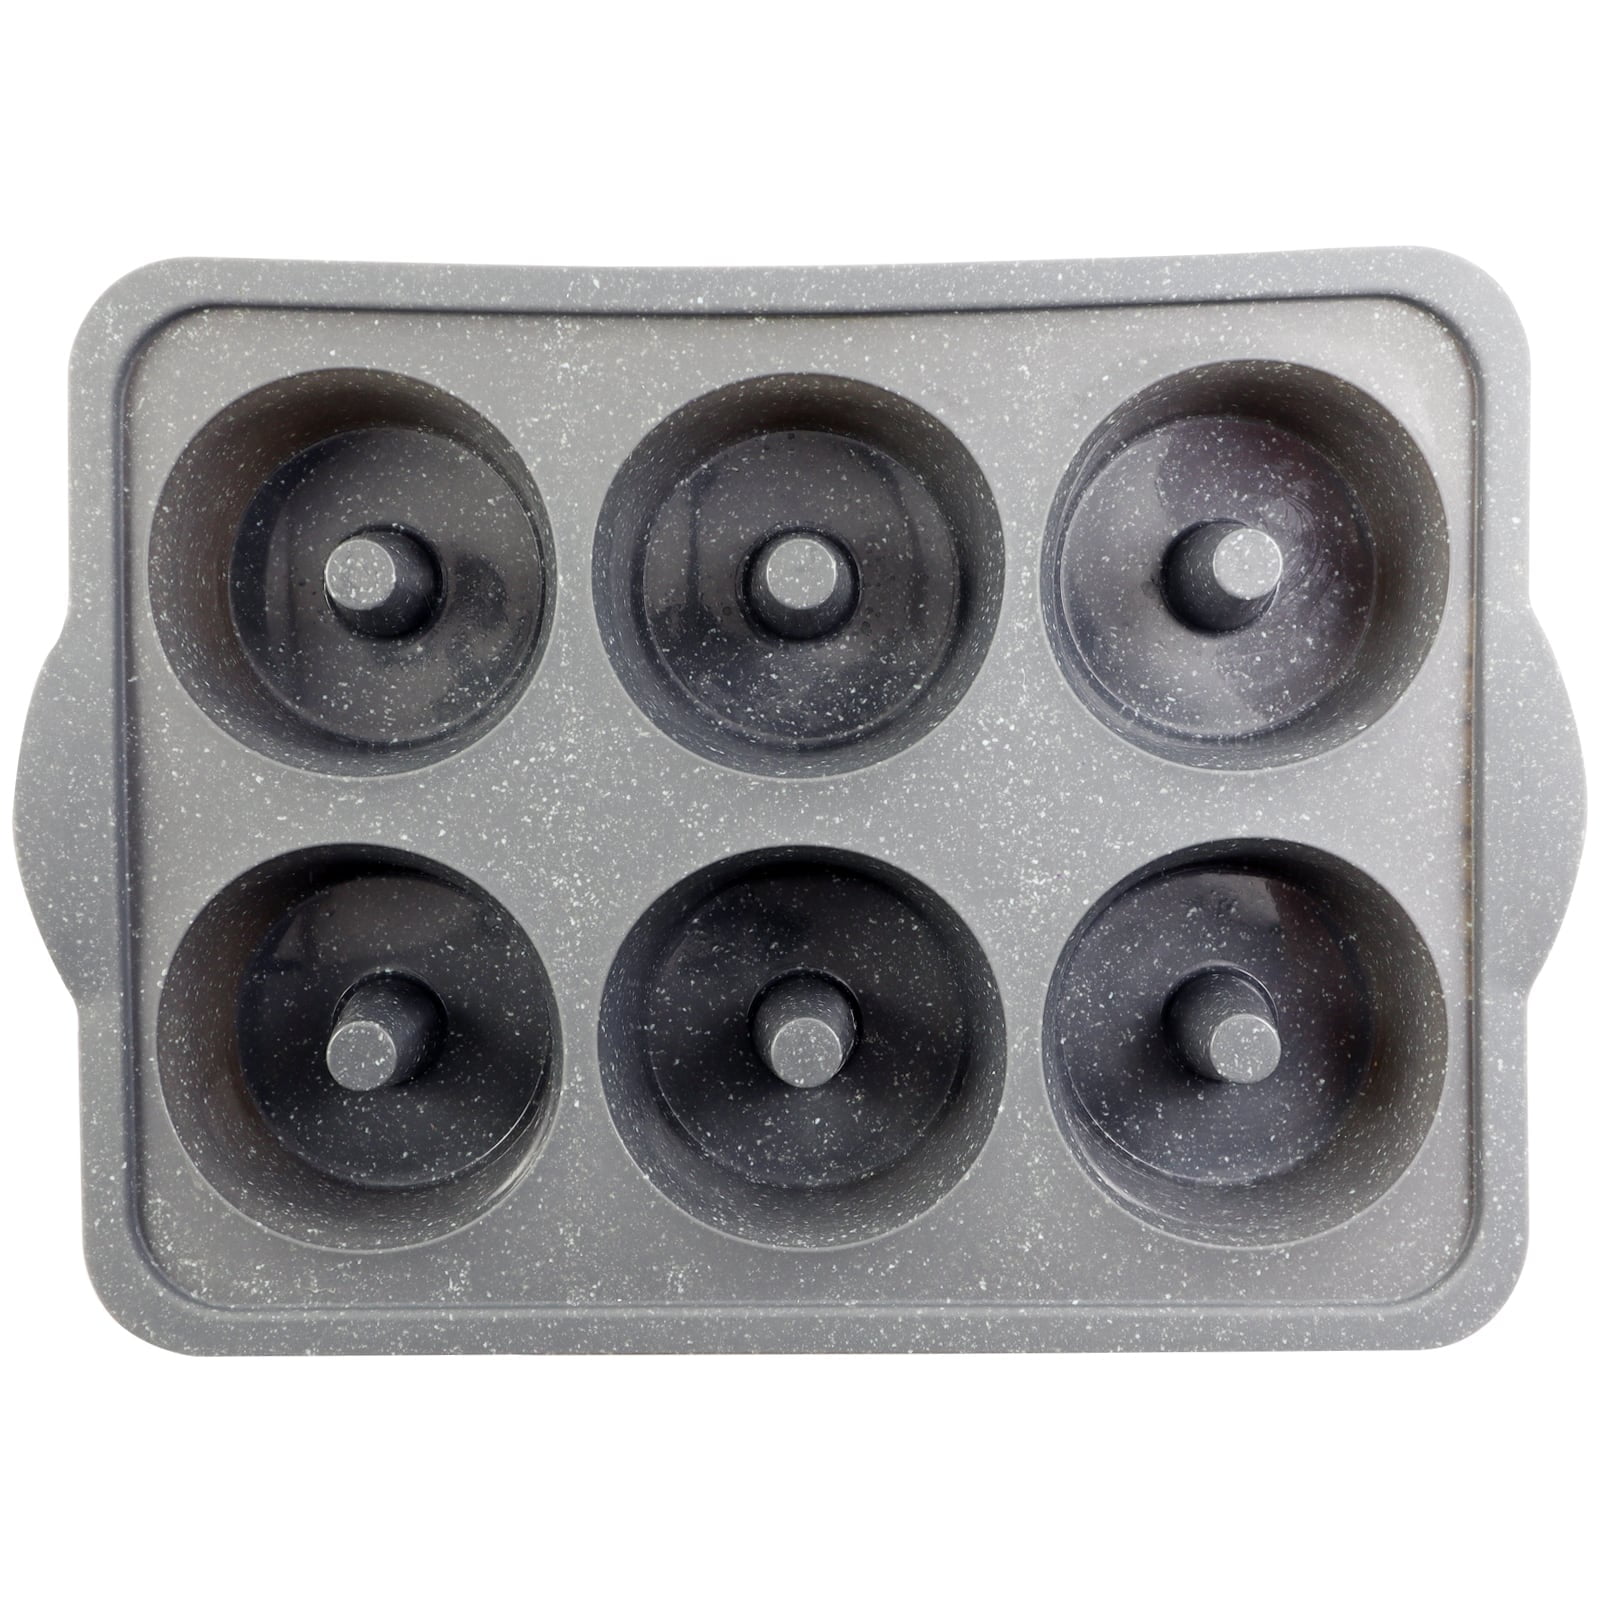 Metal Reinforced Silicone Loaf Pan by Celebrate It™